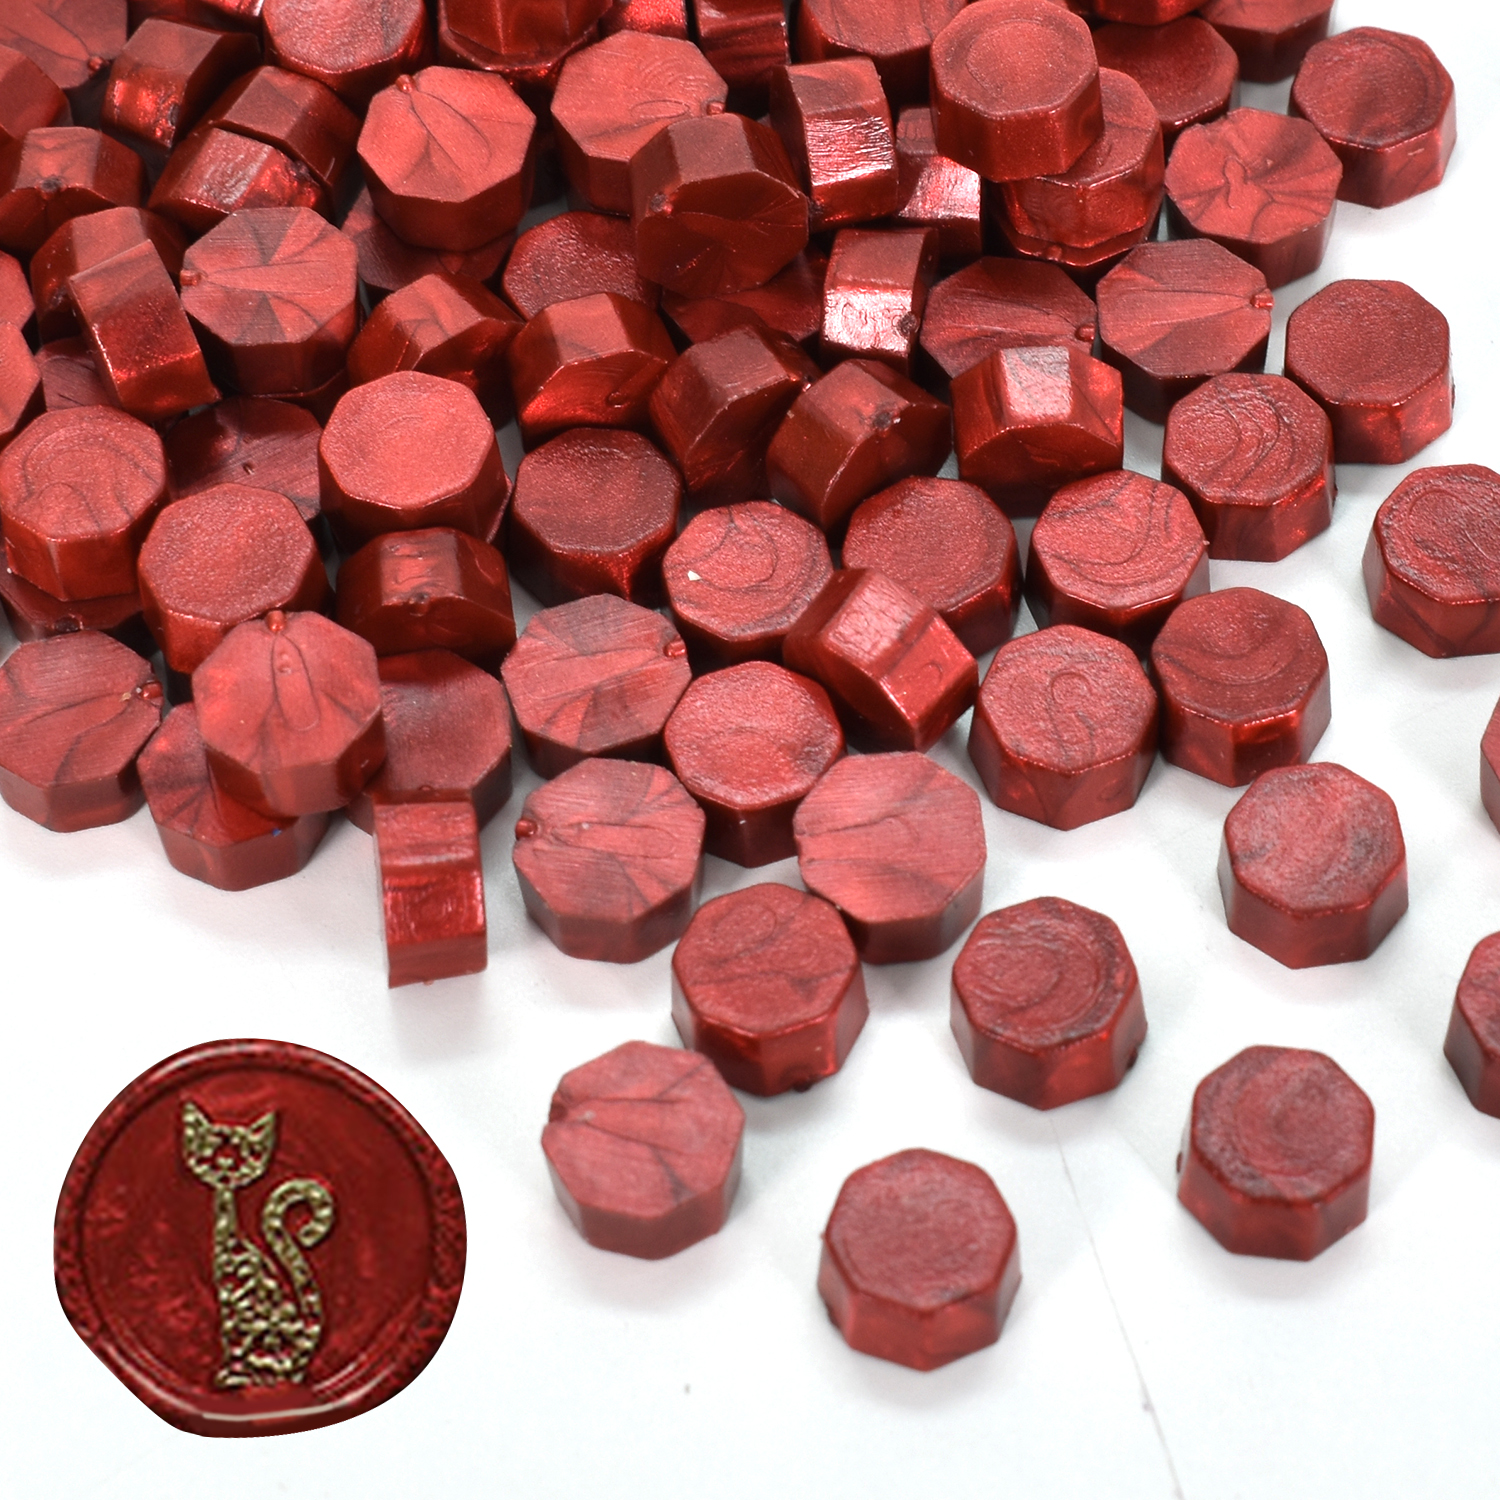 Red Wax for Letters Stamp Seals Sealing Wax Kit with Wax Seal Beads Wax  Seal Warmer Wax Spoon and Candles - AliExpress